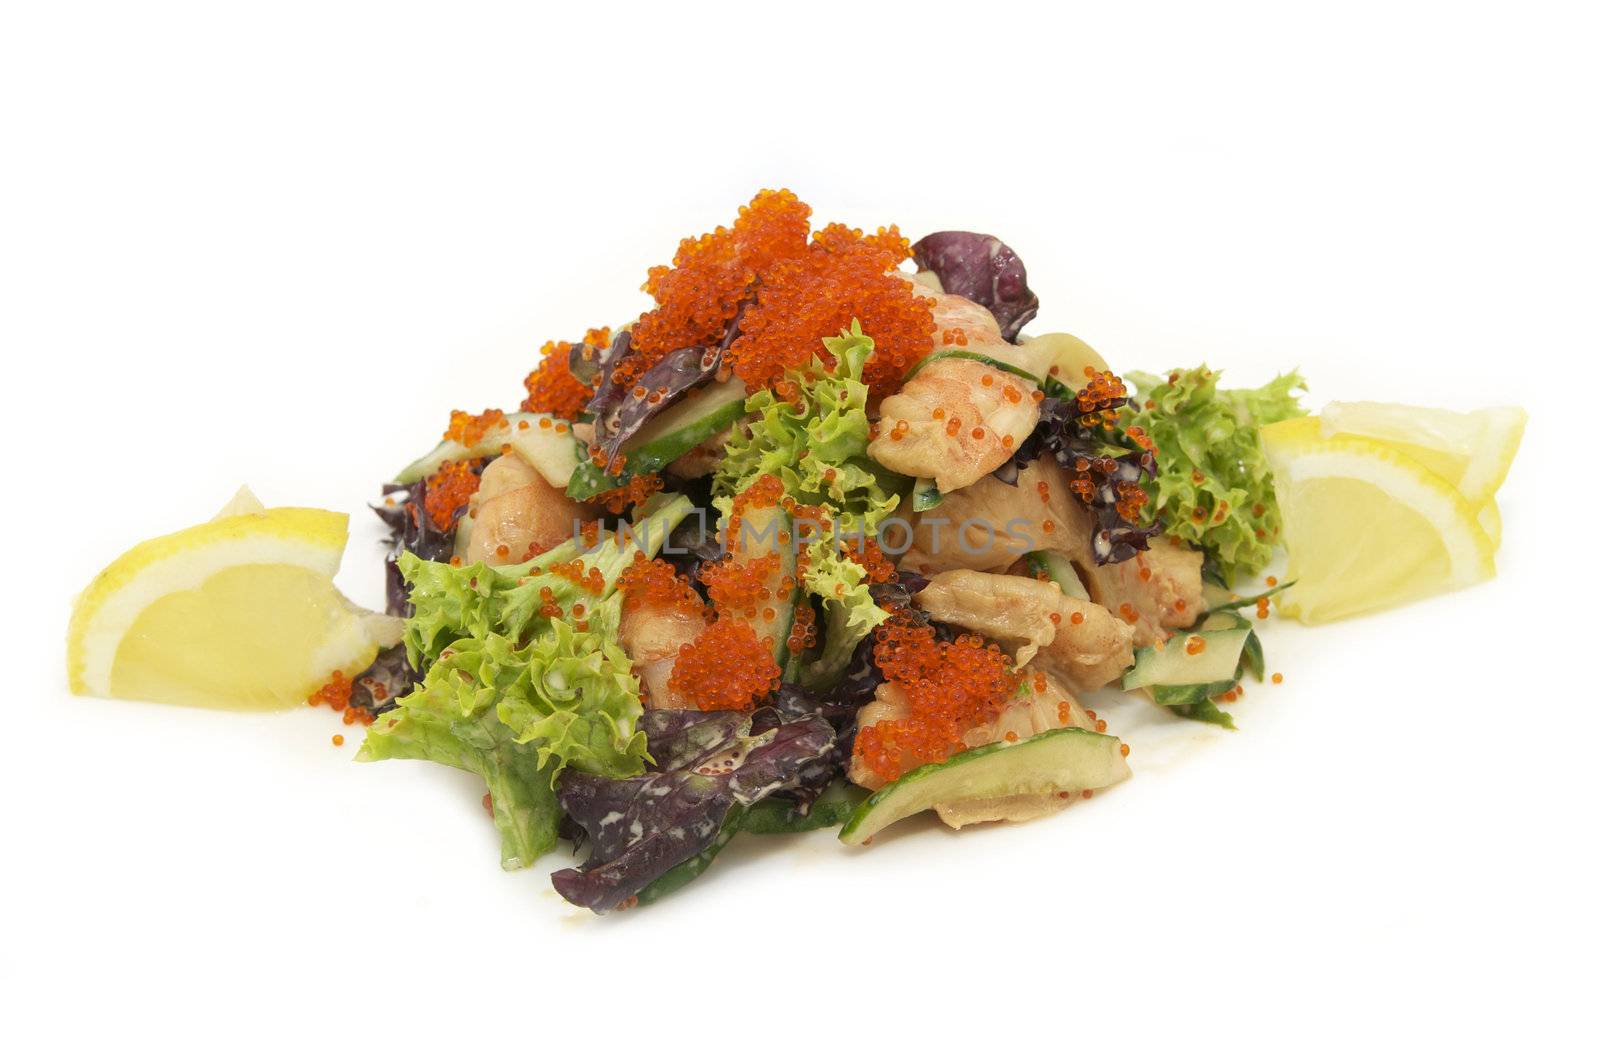 salad with caviar and shrimp by Lester120